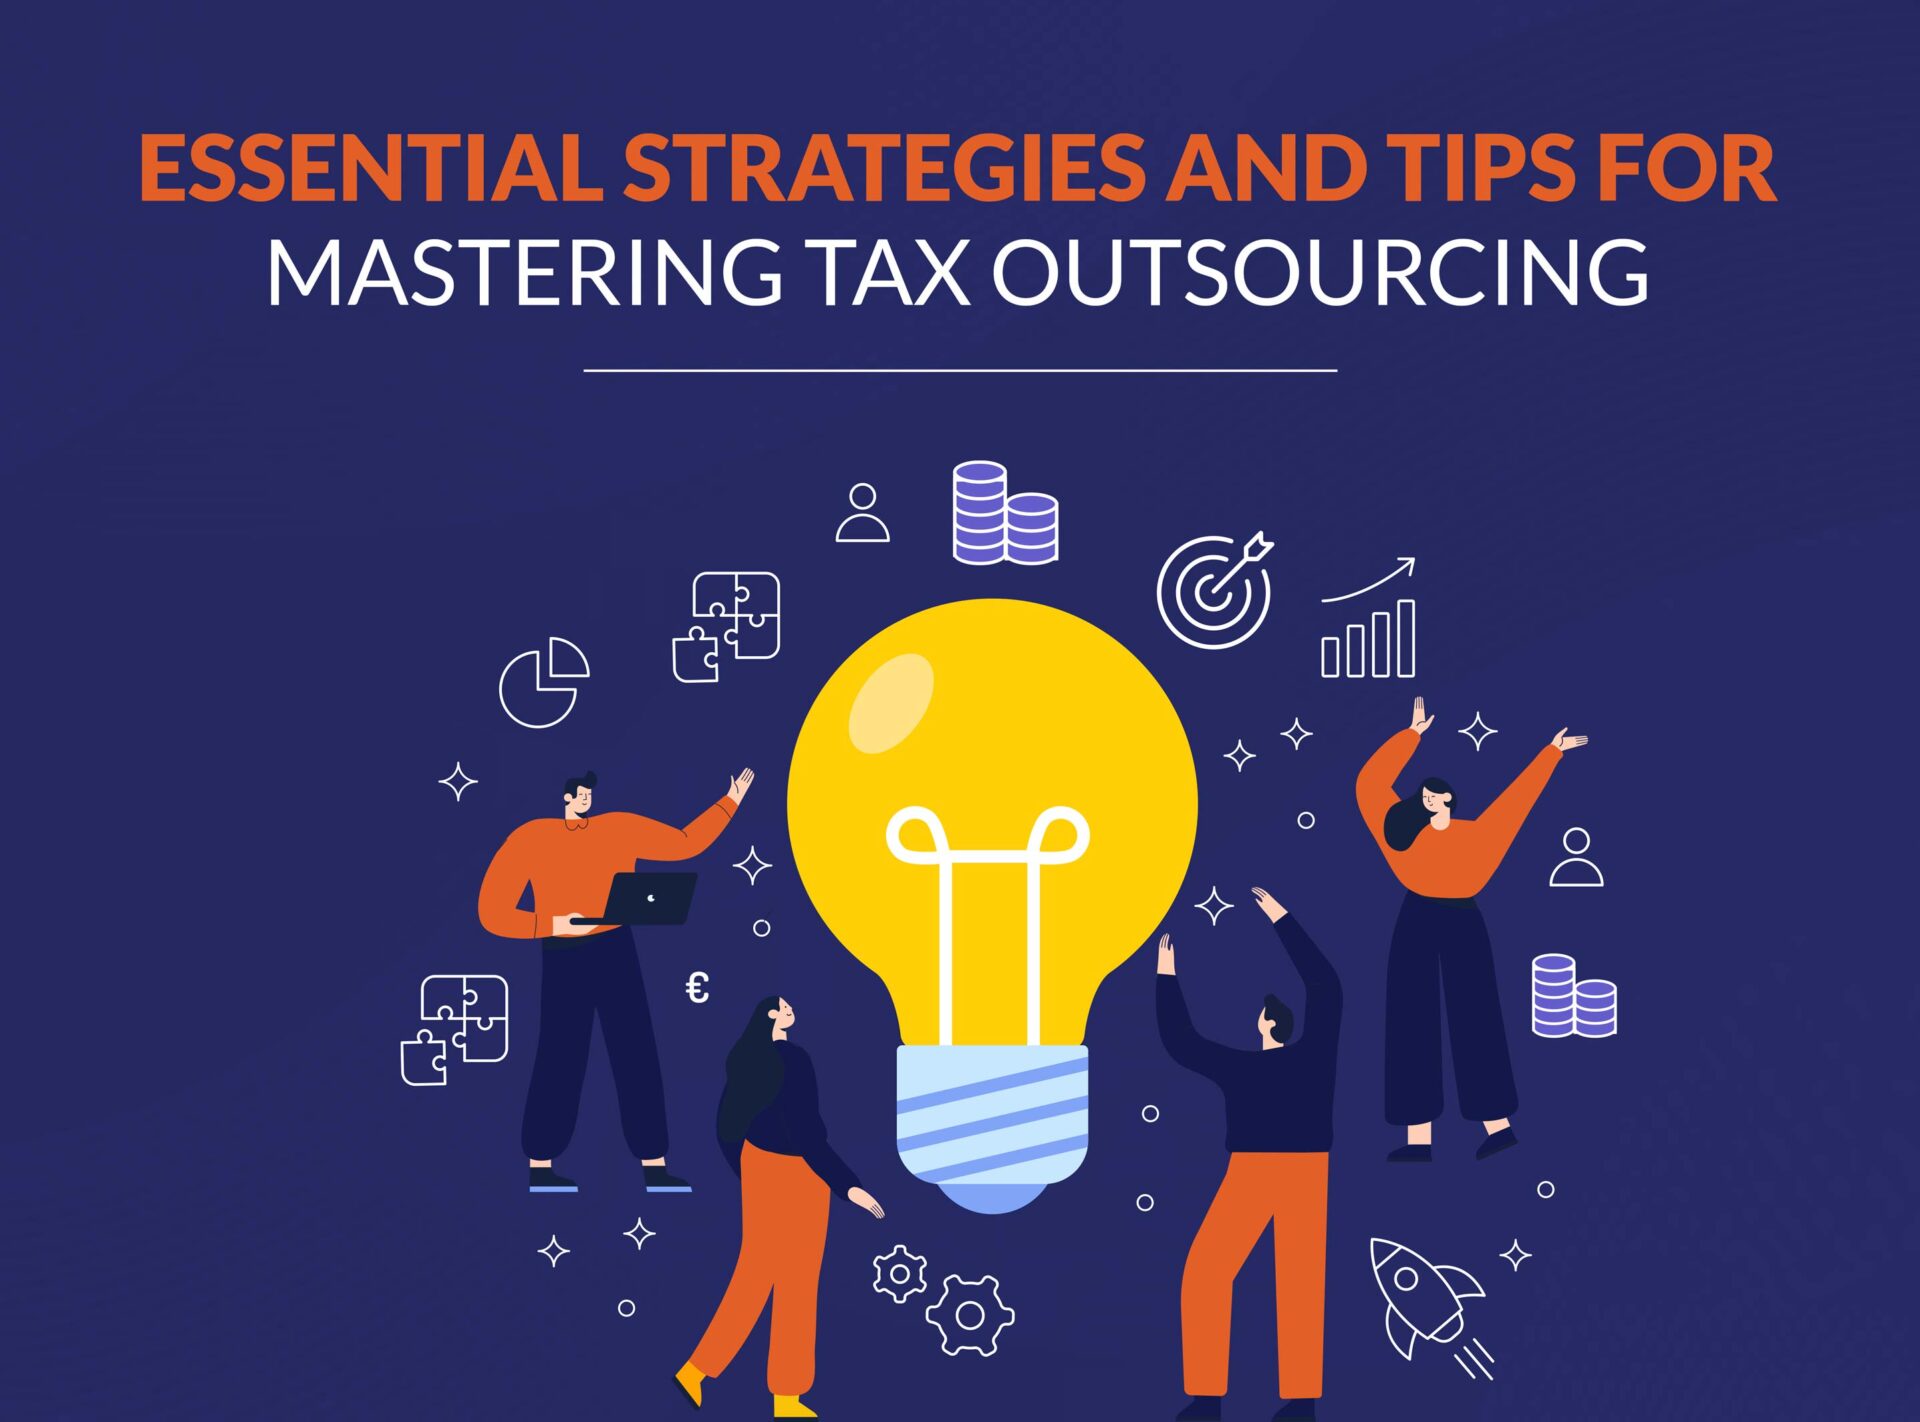 10 Essential Strategies and Tips for Mastering Tax Outsourcing